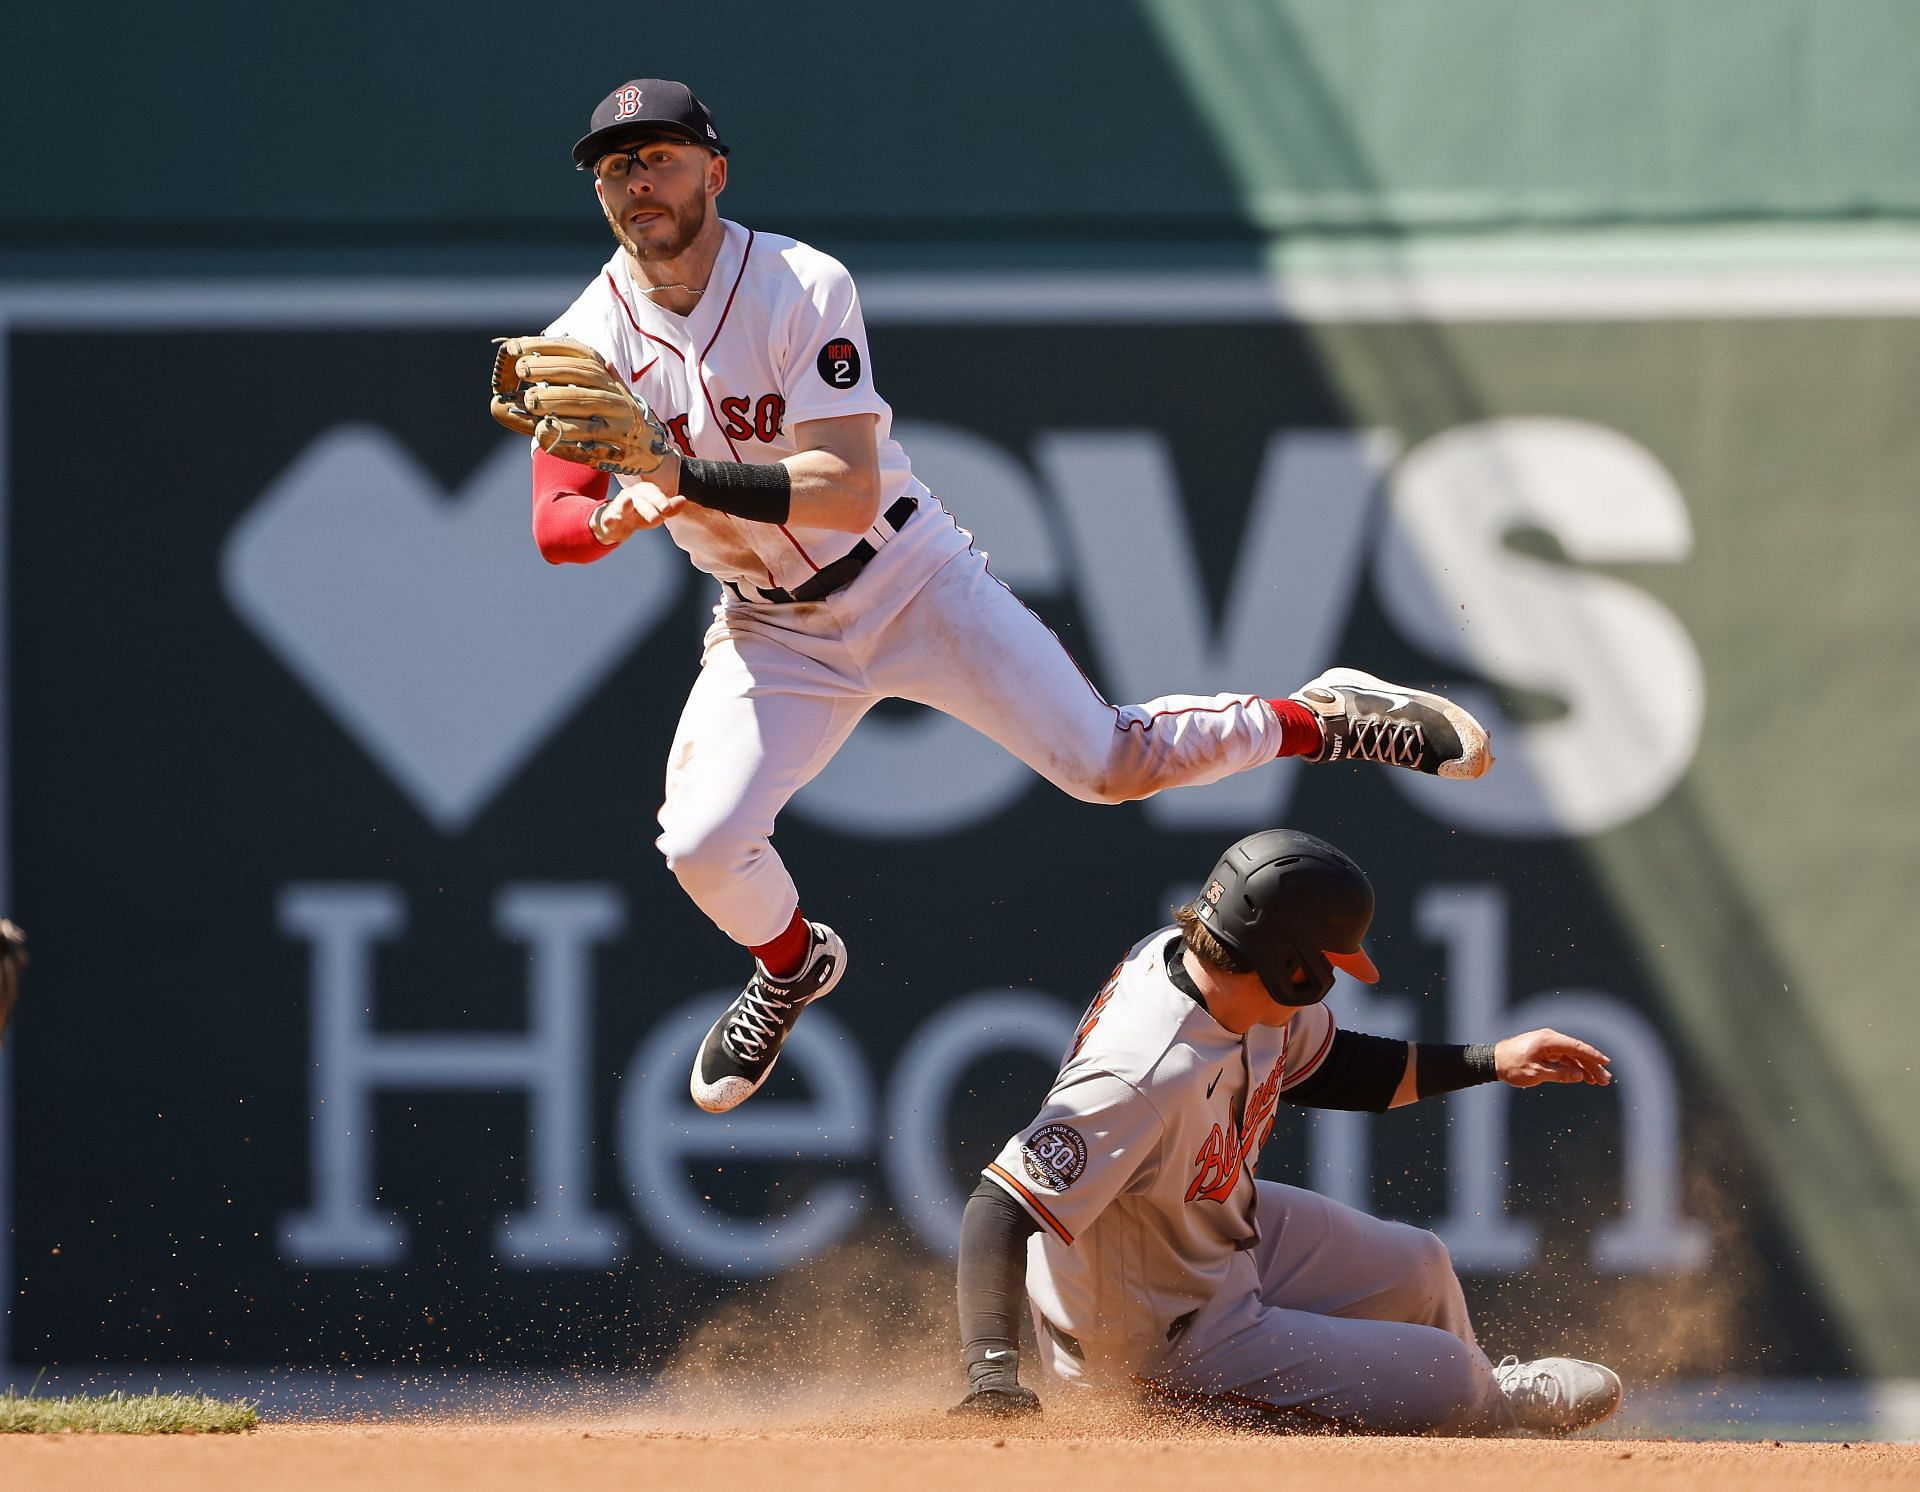 Boston Red Sox fans fired up by star infielder Trevor Story nearing return  from injury: It's all coming together He is going to run wild